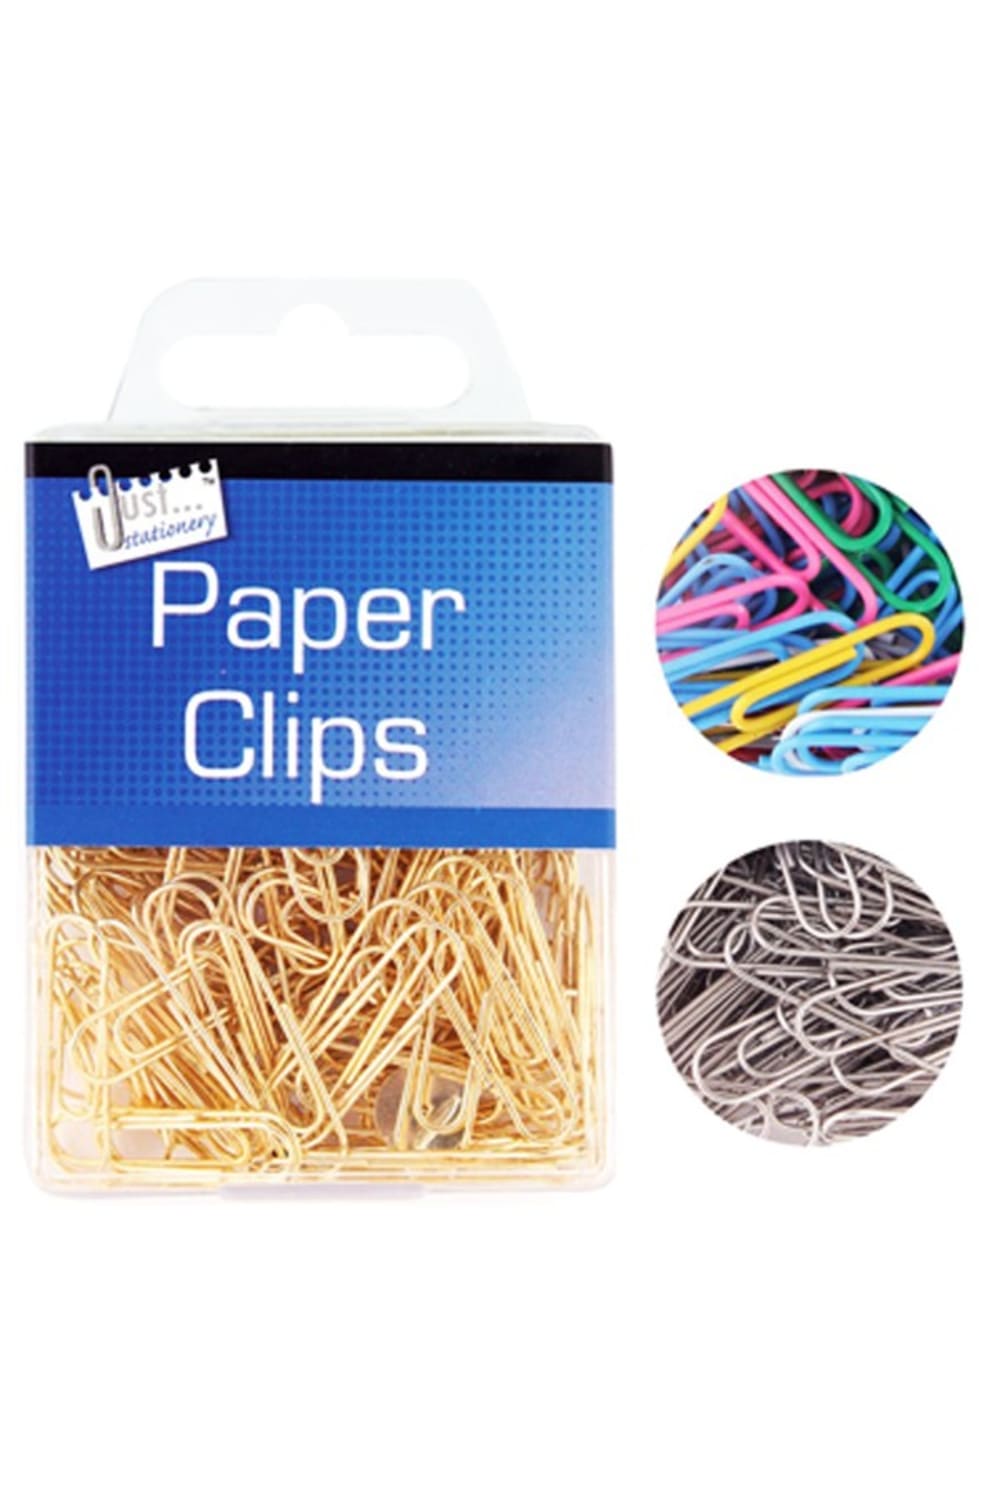 Just Stationery Assorted Paper Clips In Hanging Boxes (12 Packs) (Multicolored) (1in)